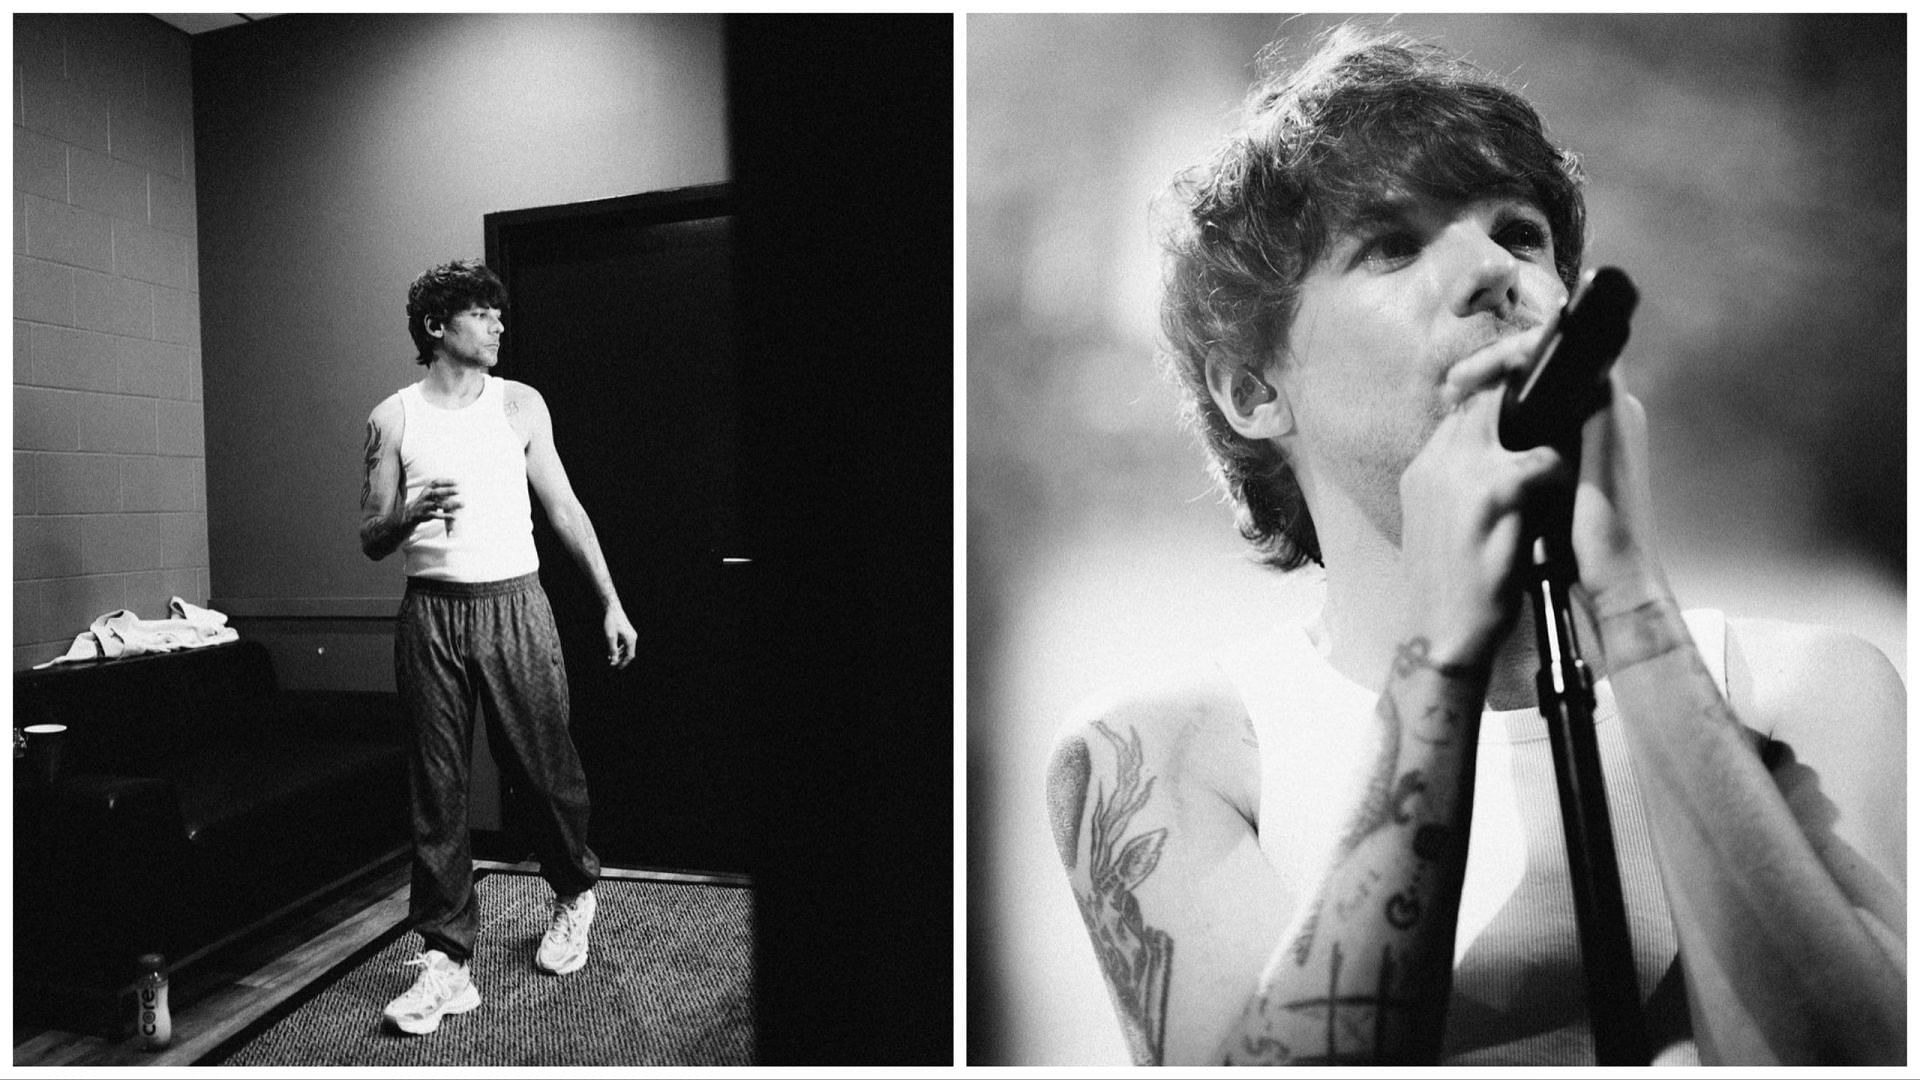 FAITH IN THE FUTURE - LOUIS TOMLINSON SUPPORT at THE O2 ARENA